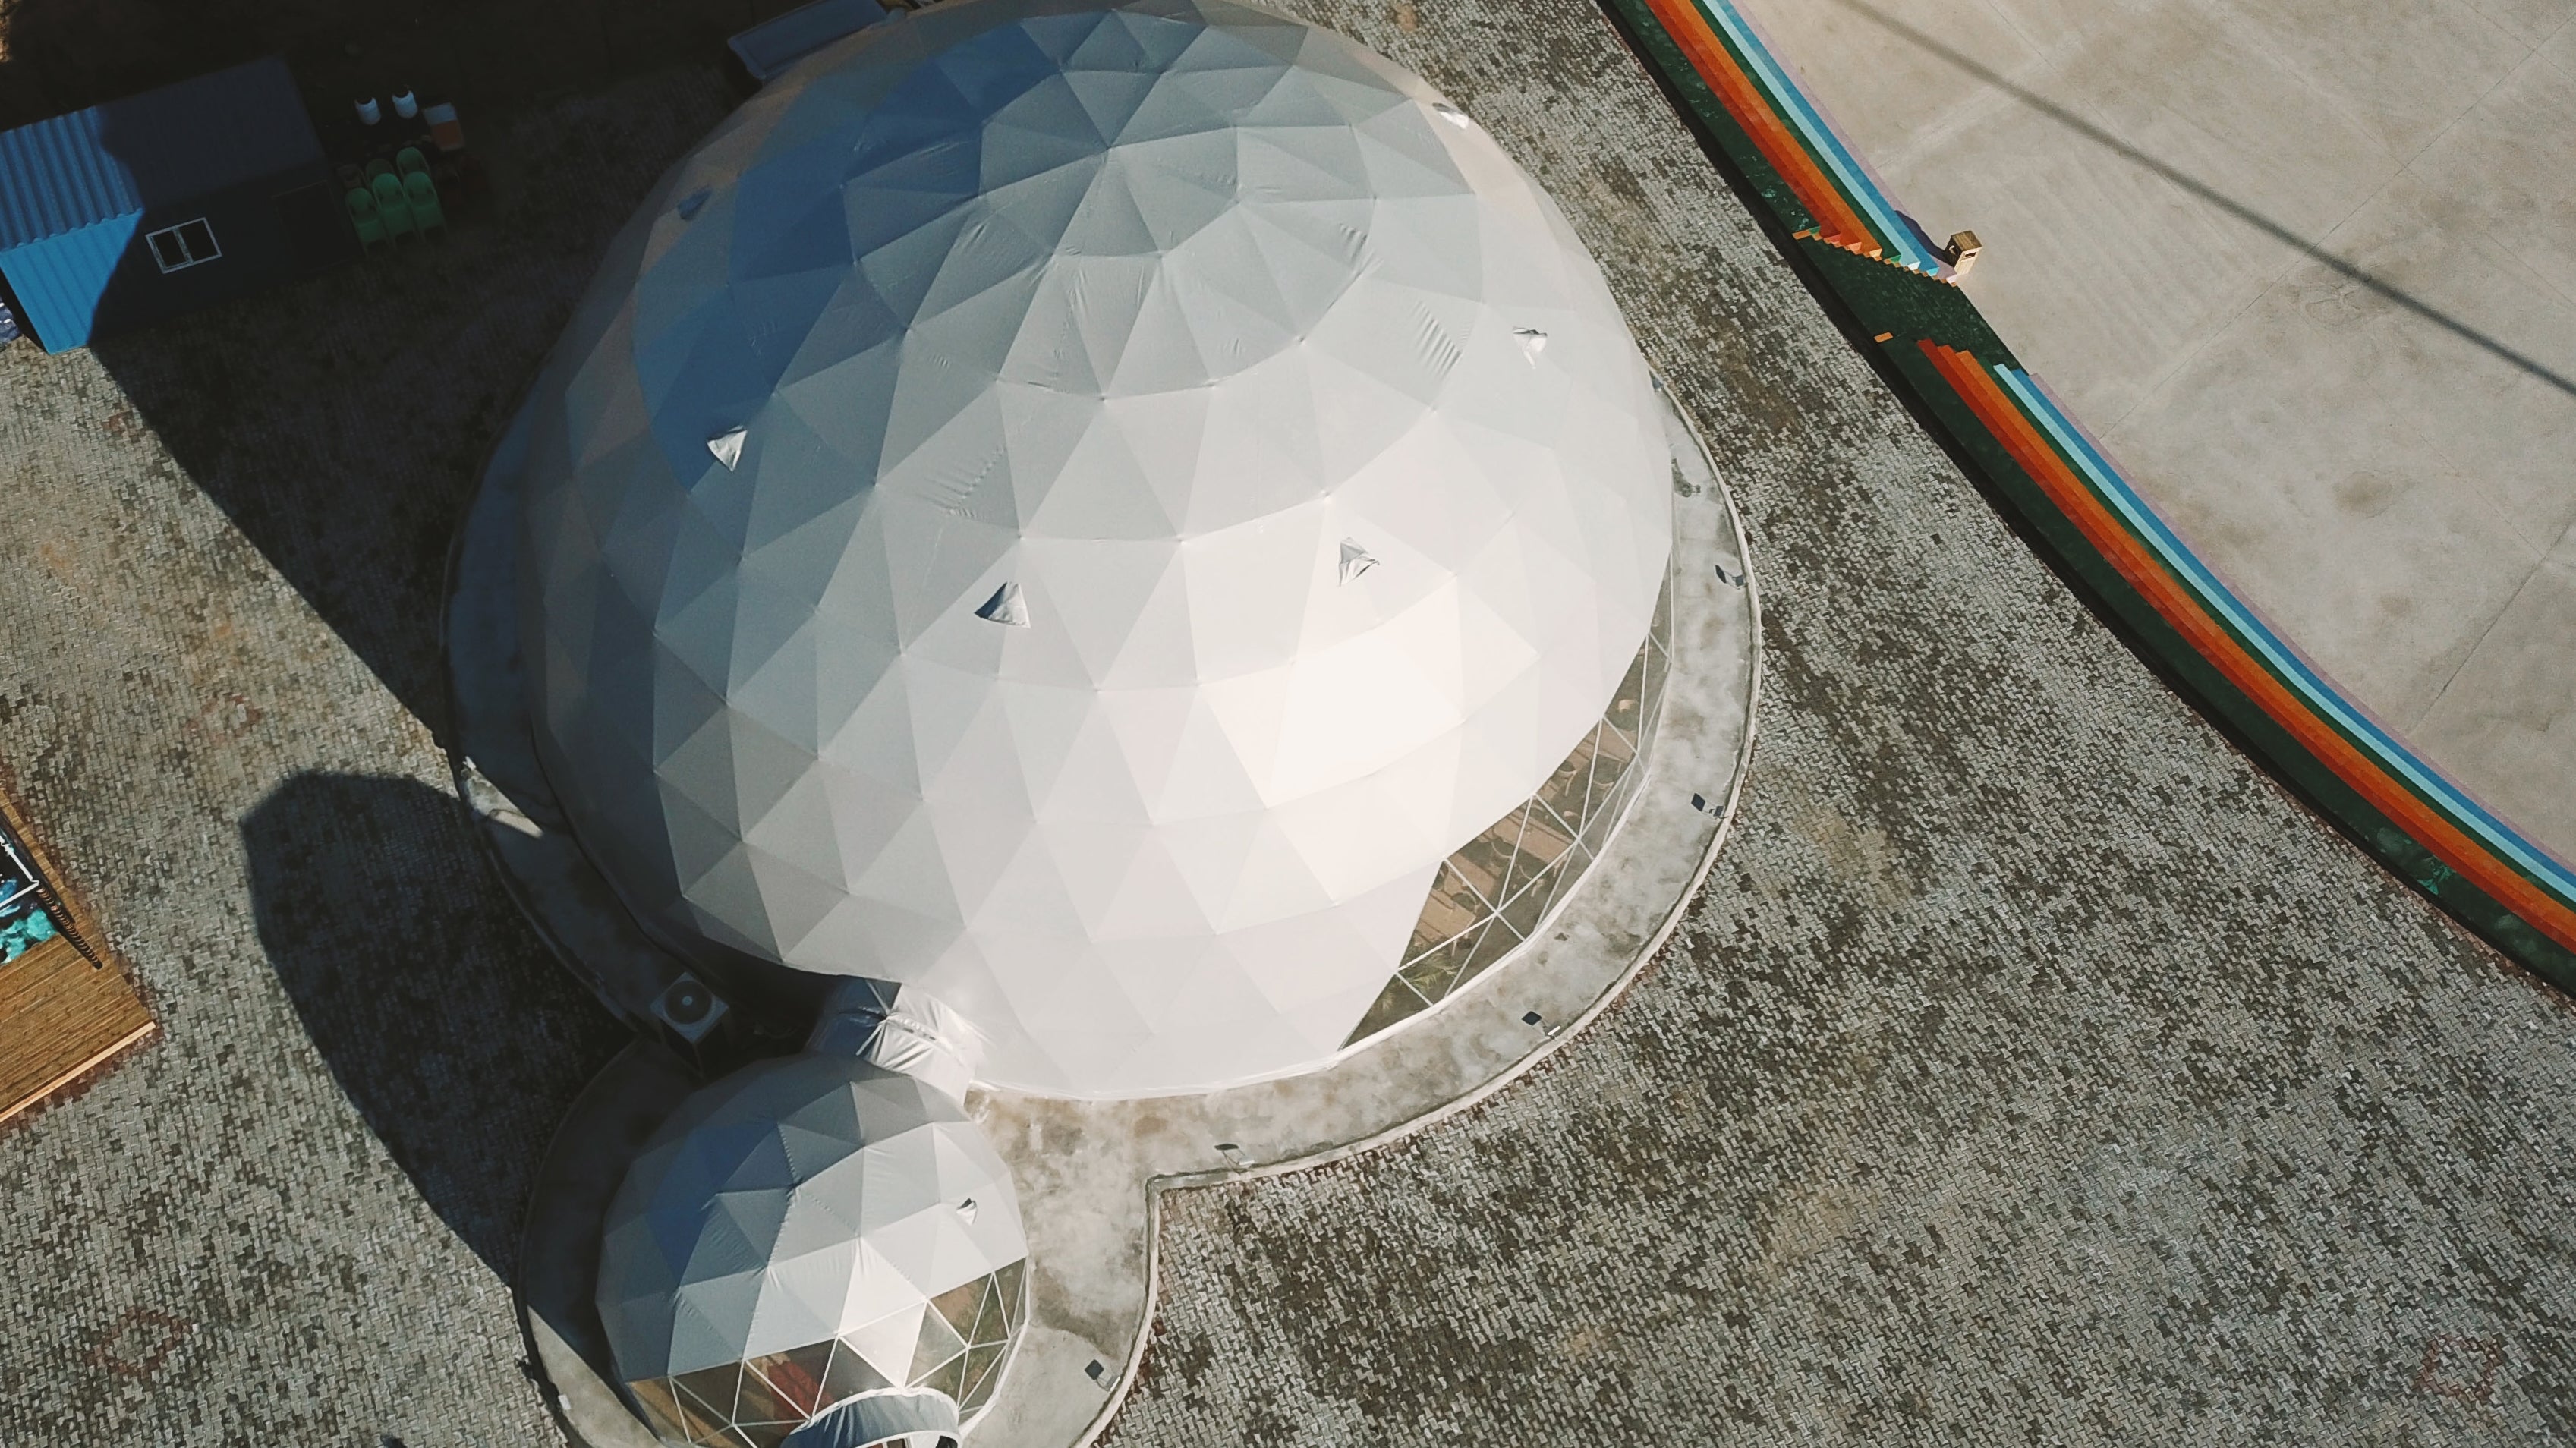 Commercial giant geodesic dome for event / expo / wedding / bar / restaurant